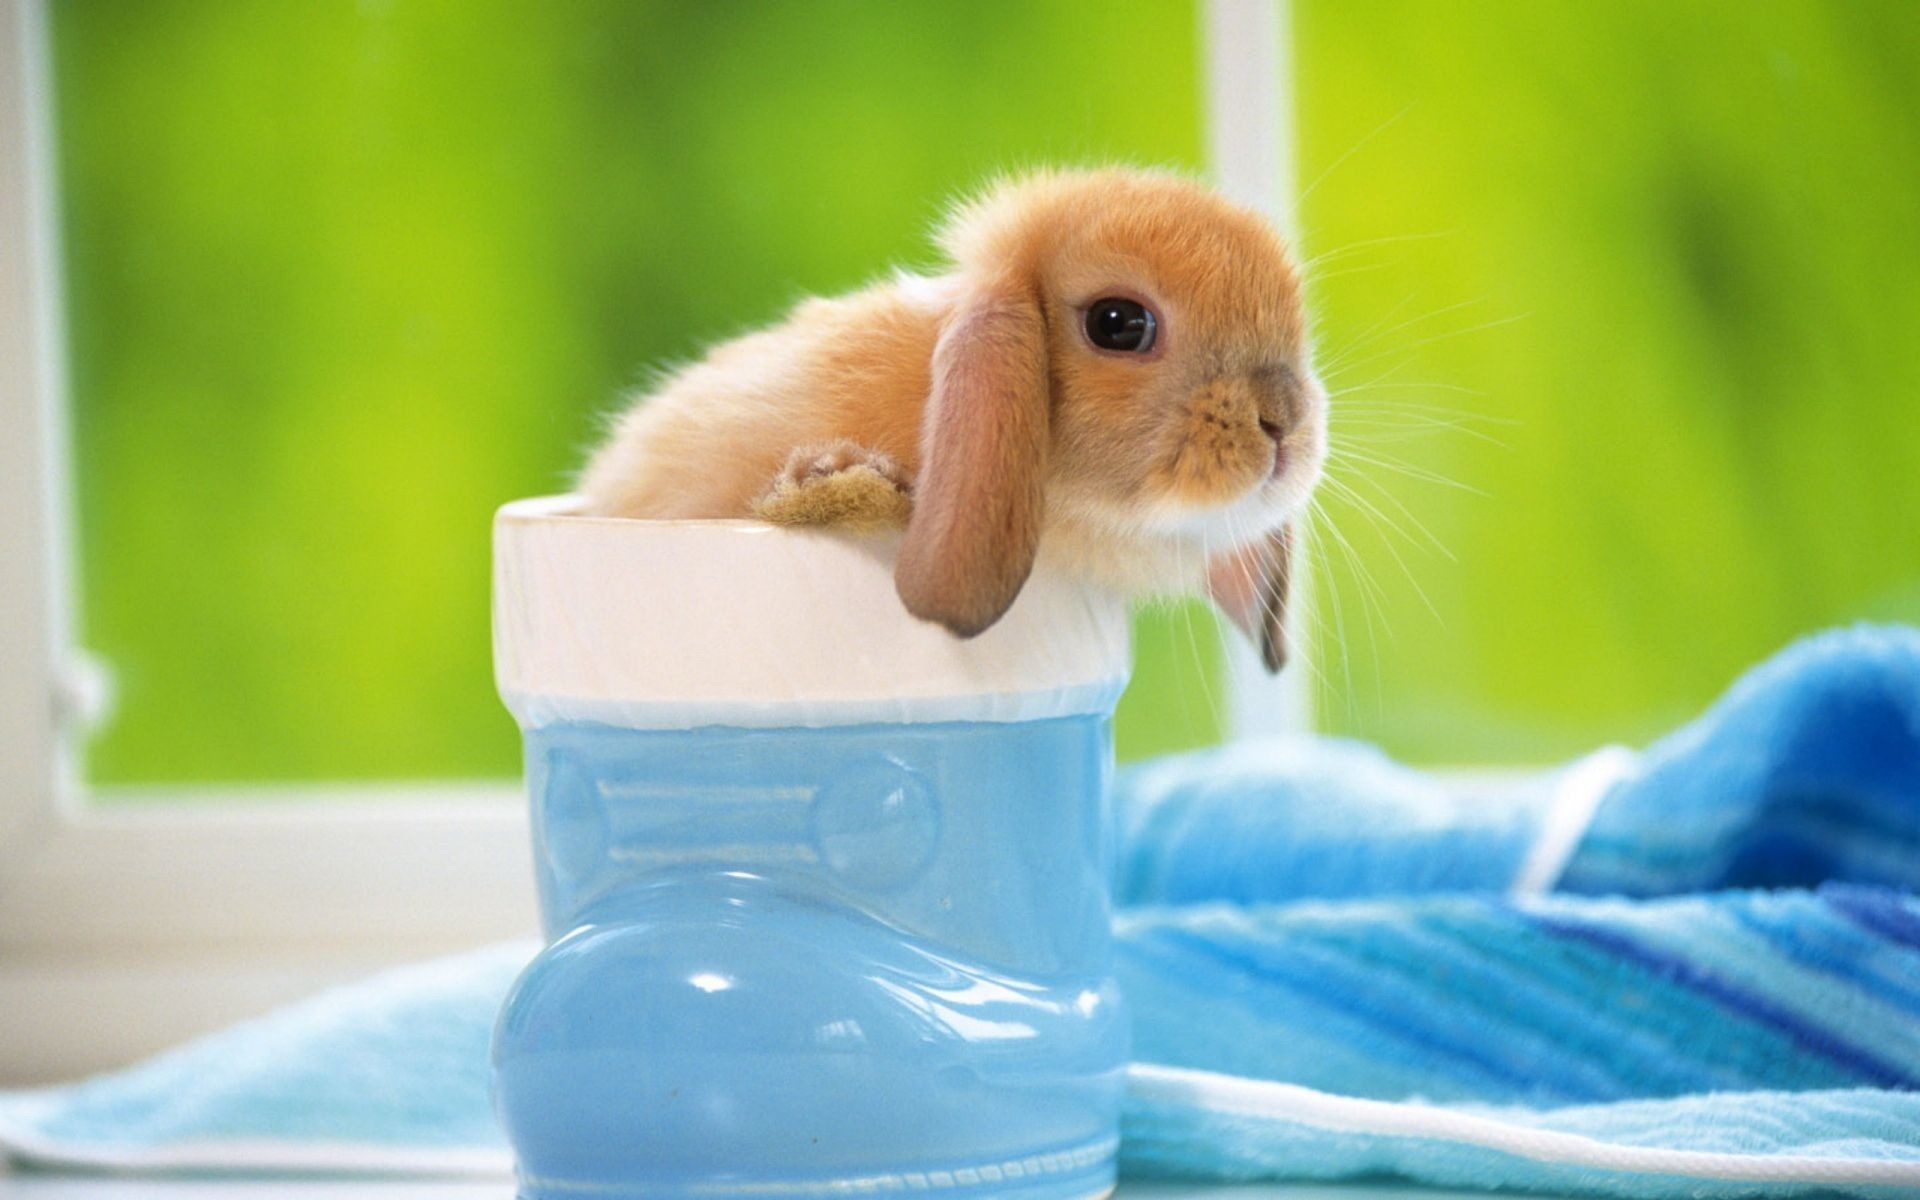 1920x1200 1920x1280 Cute white baby rabbits wallpapers - photo#13